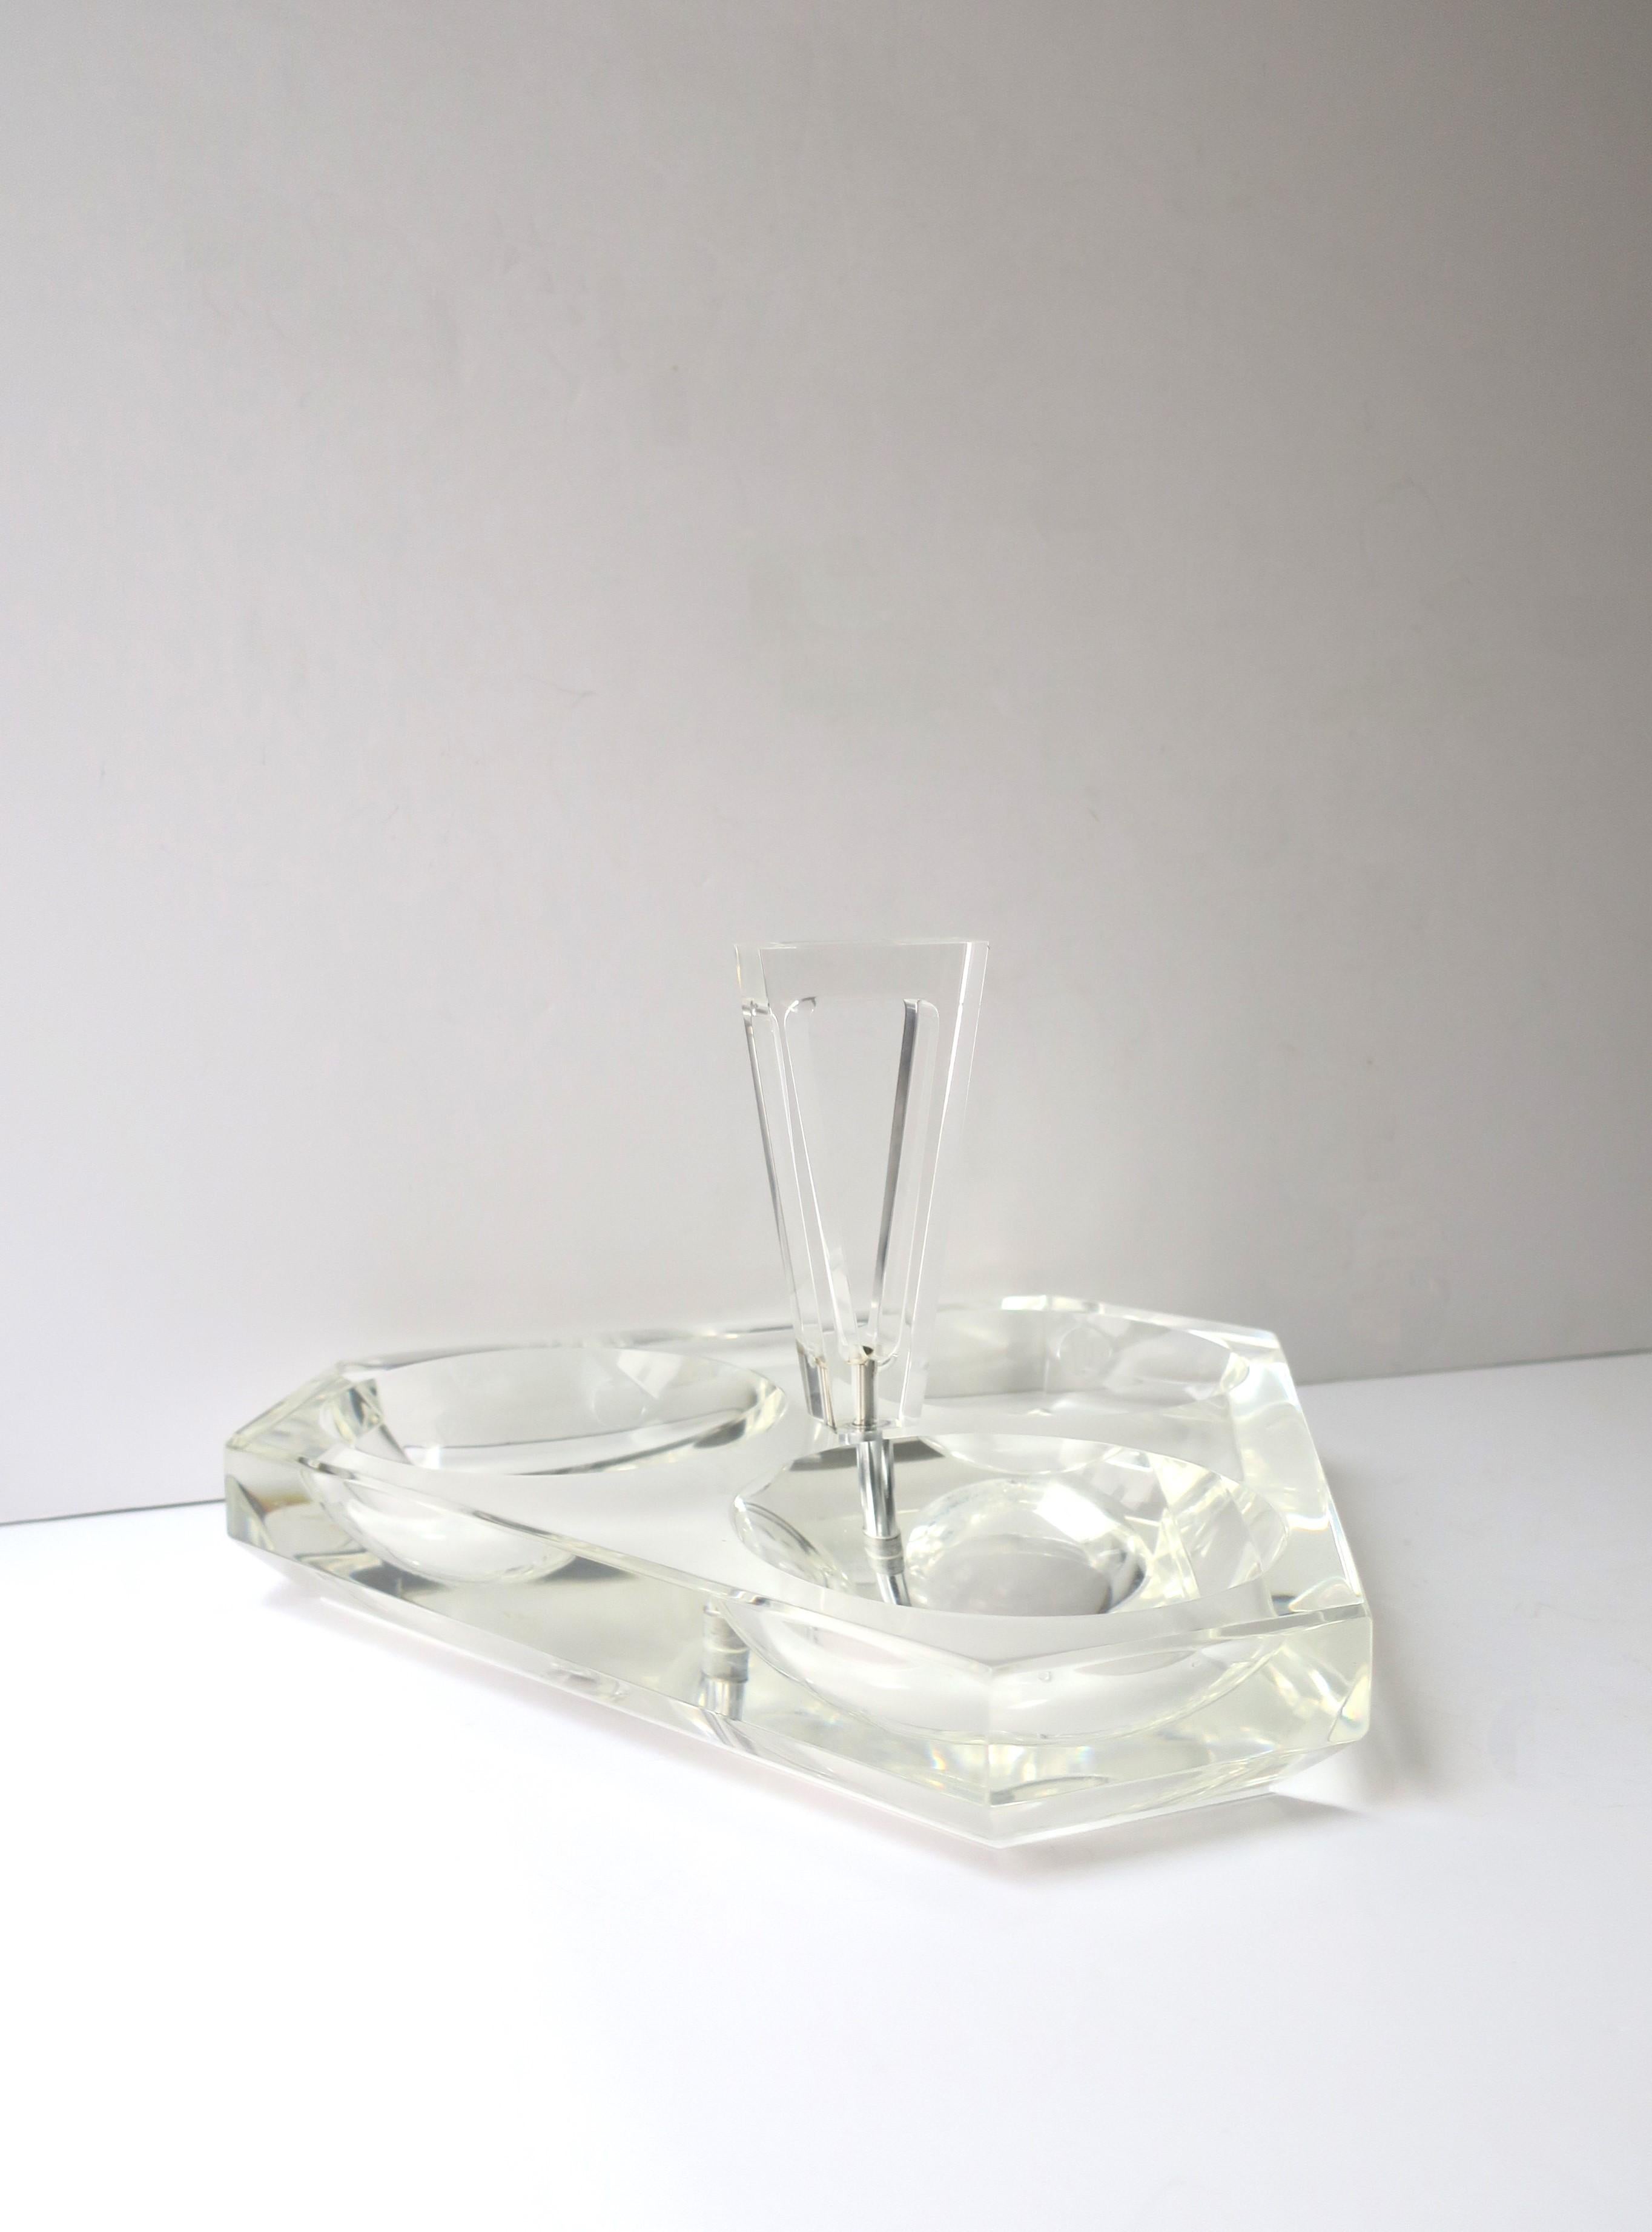 A substantial and well-made Lucite entertaining snack or nuts caddy, circa mid to late-20th century. Piece is triangular with soft corners. three wells for candy, snacks, nuts, etc., and top handle, making piece easily transportable. A beautiful